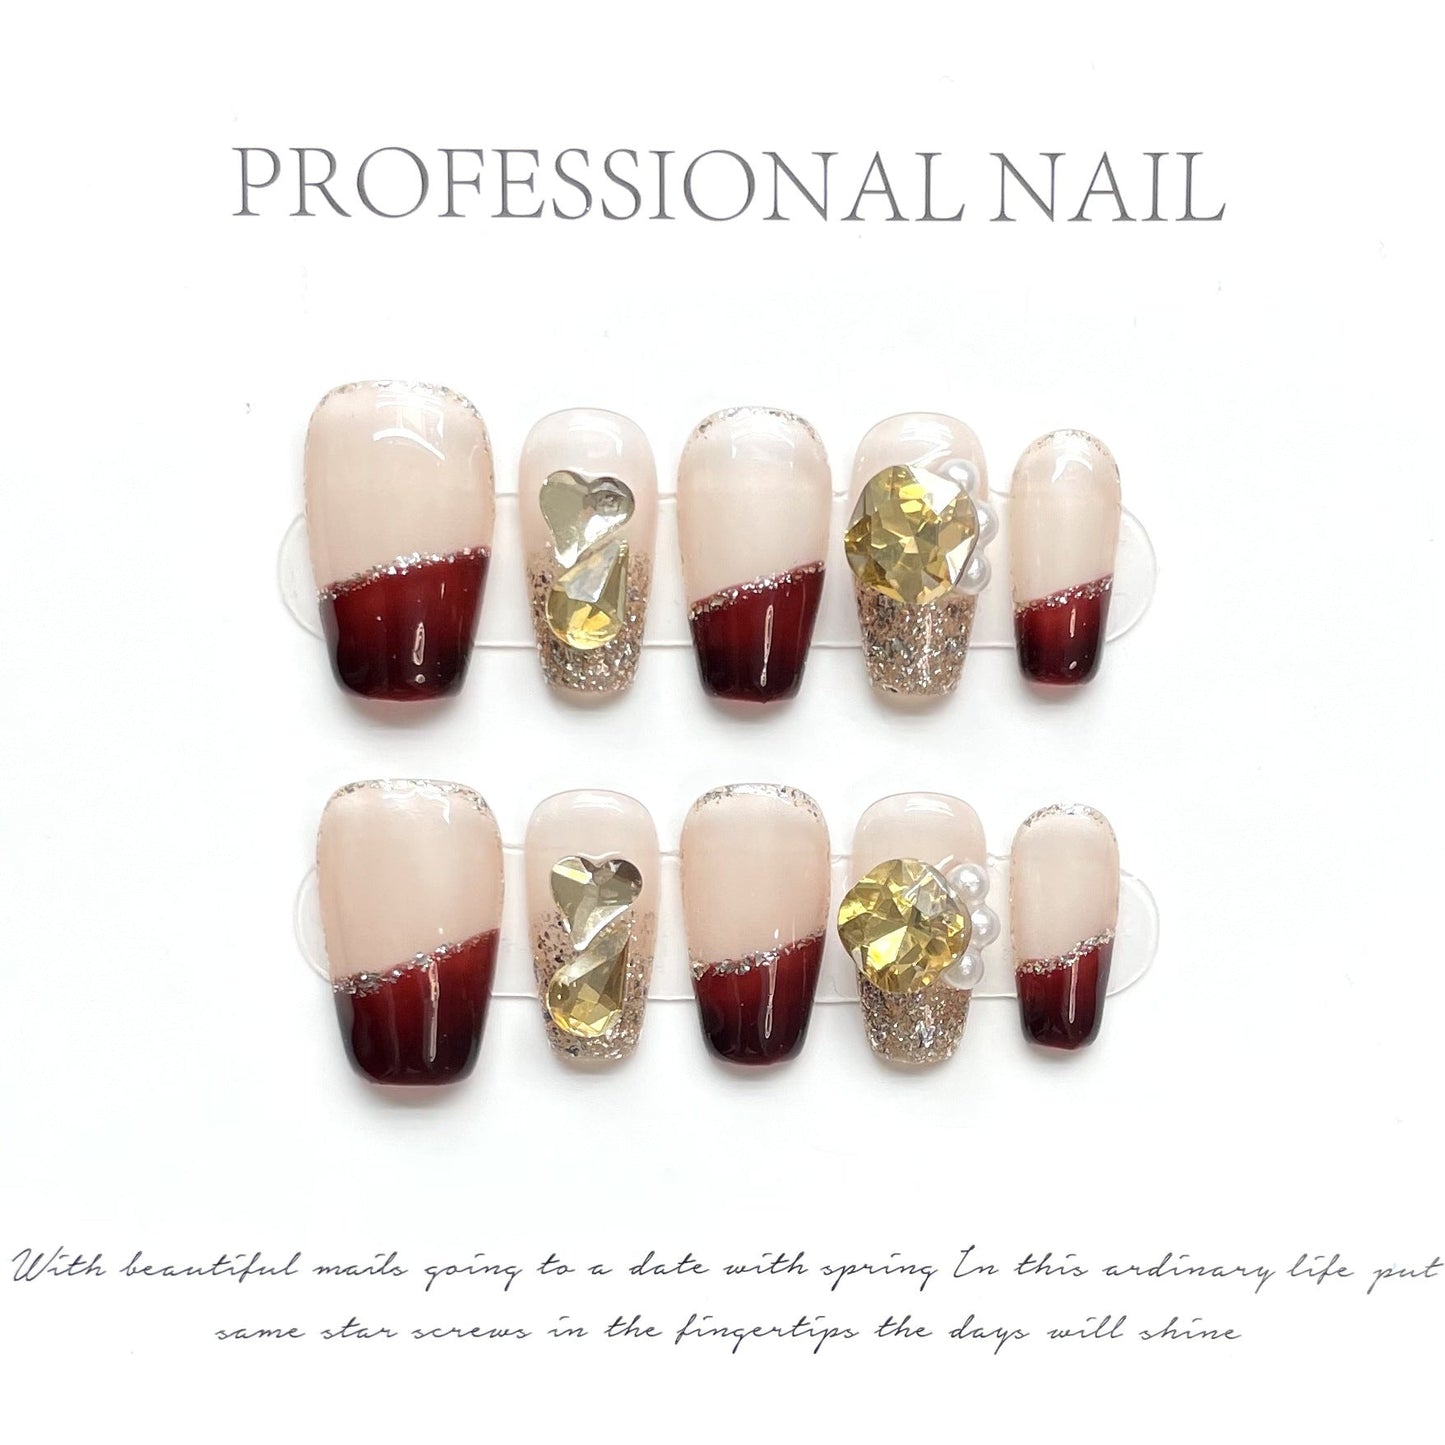 1336 Romantic French style press on nails 100% handmade false nails red nude color